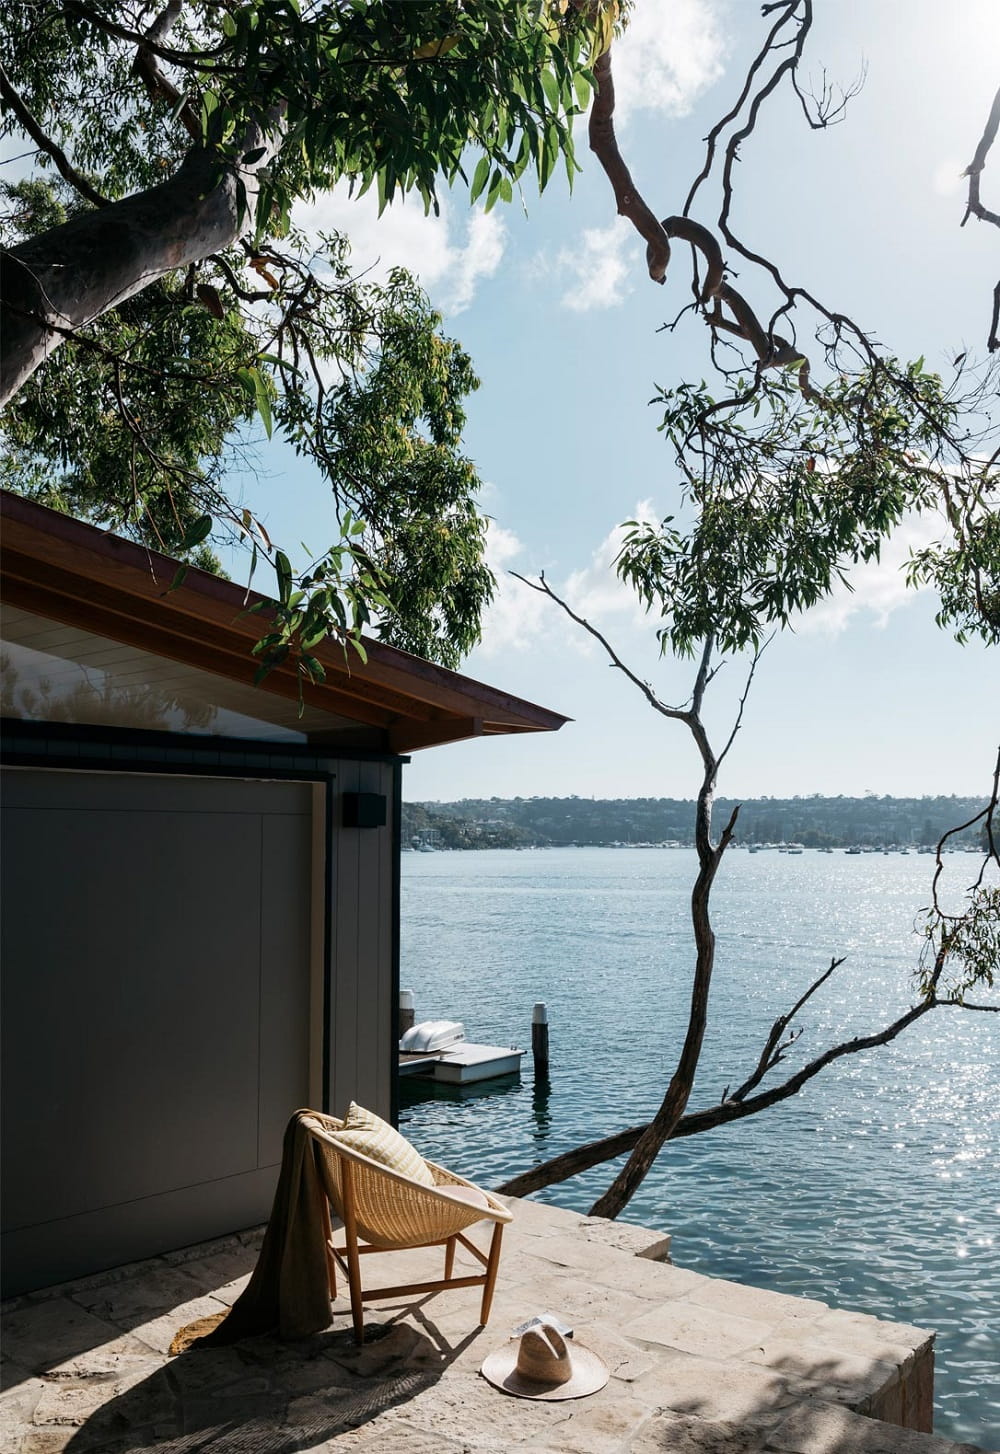 Slipway House by Arent & Pyke, Middle Cove, New South Wales, Australia